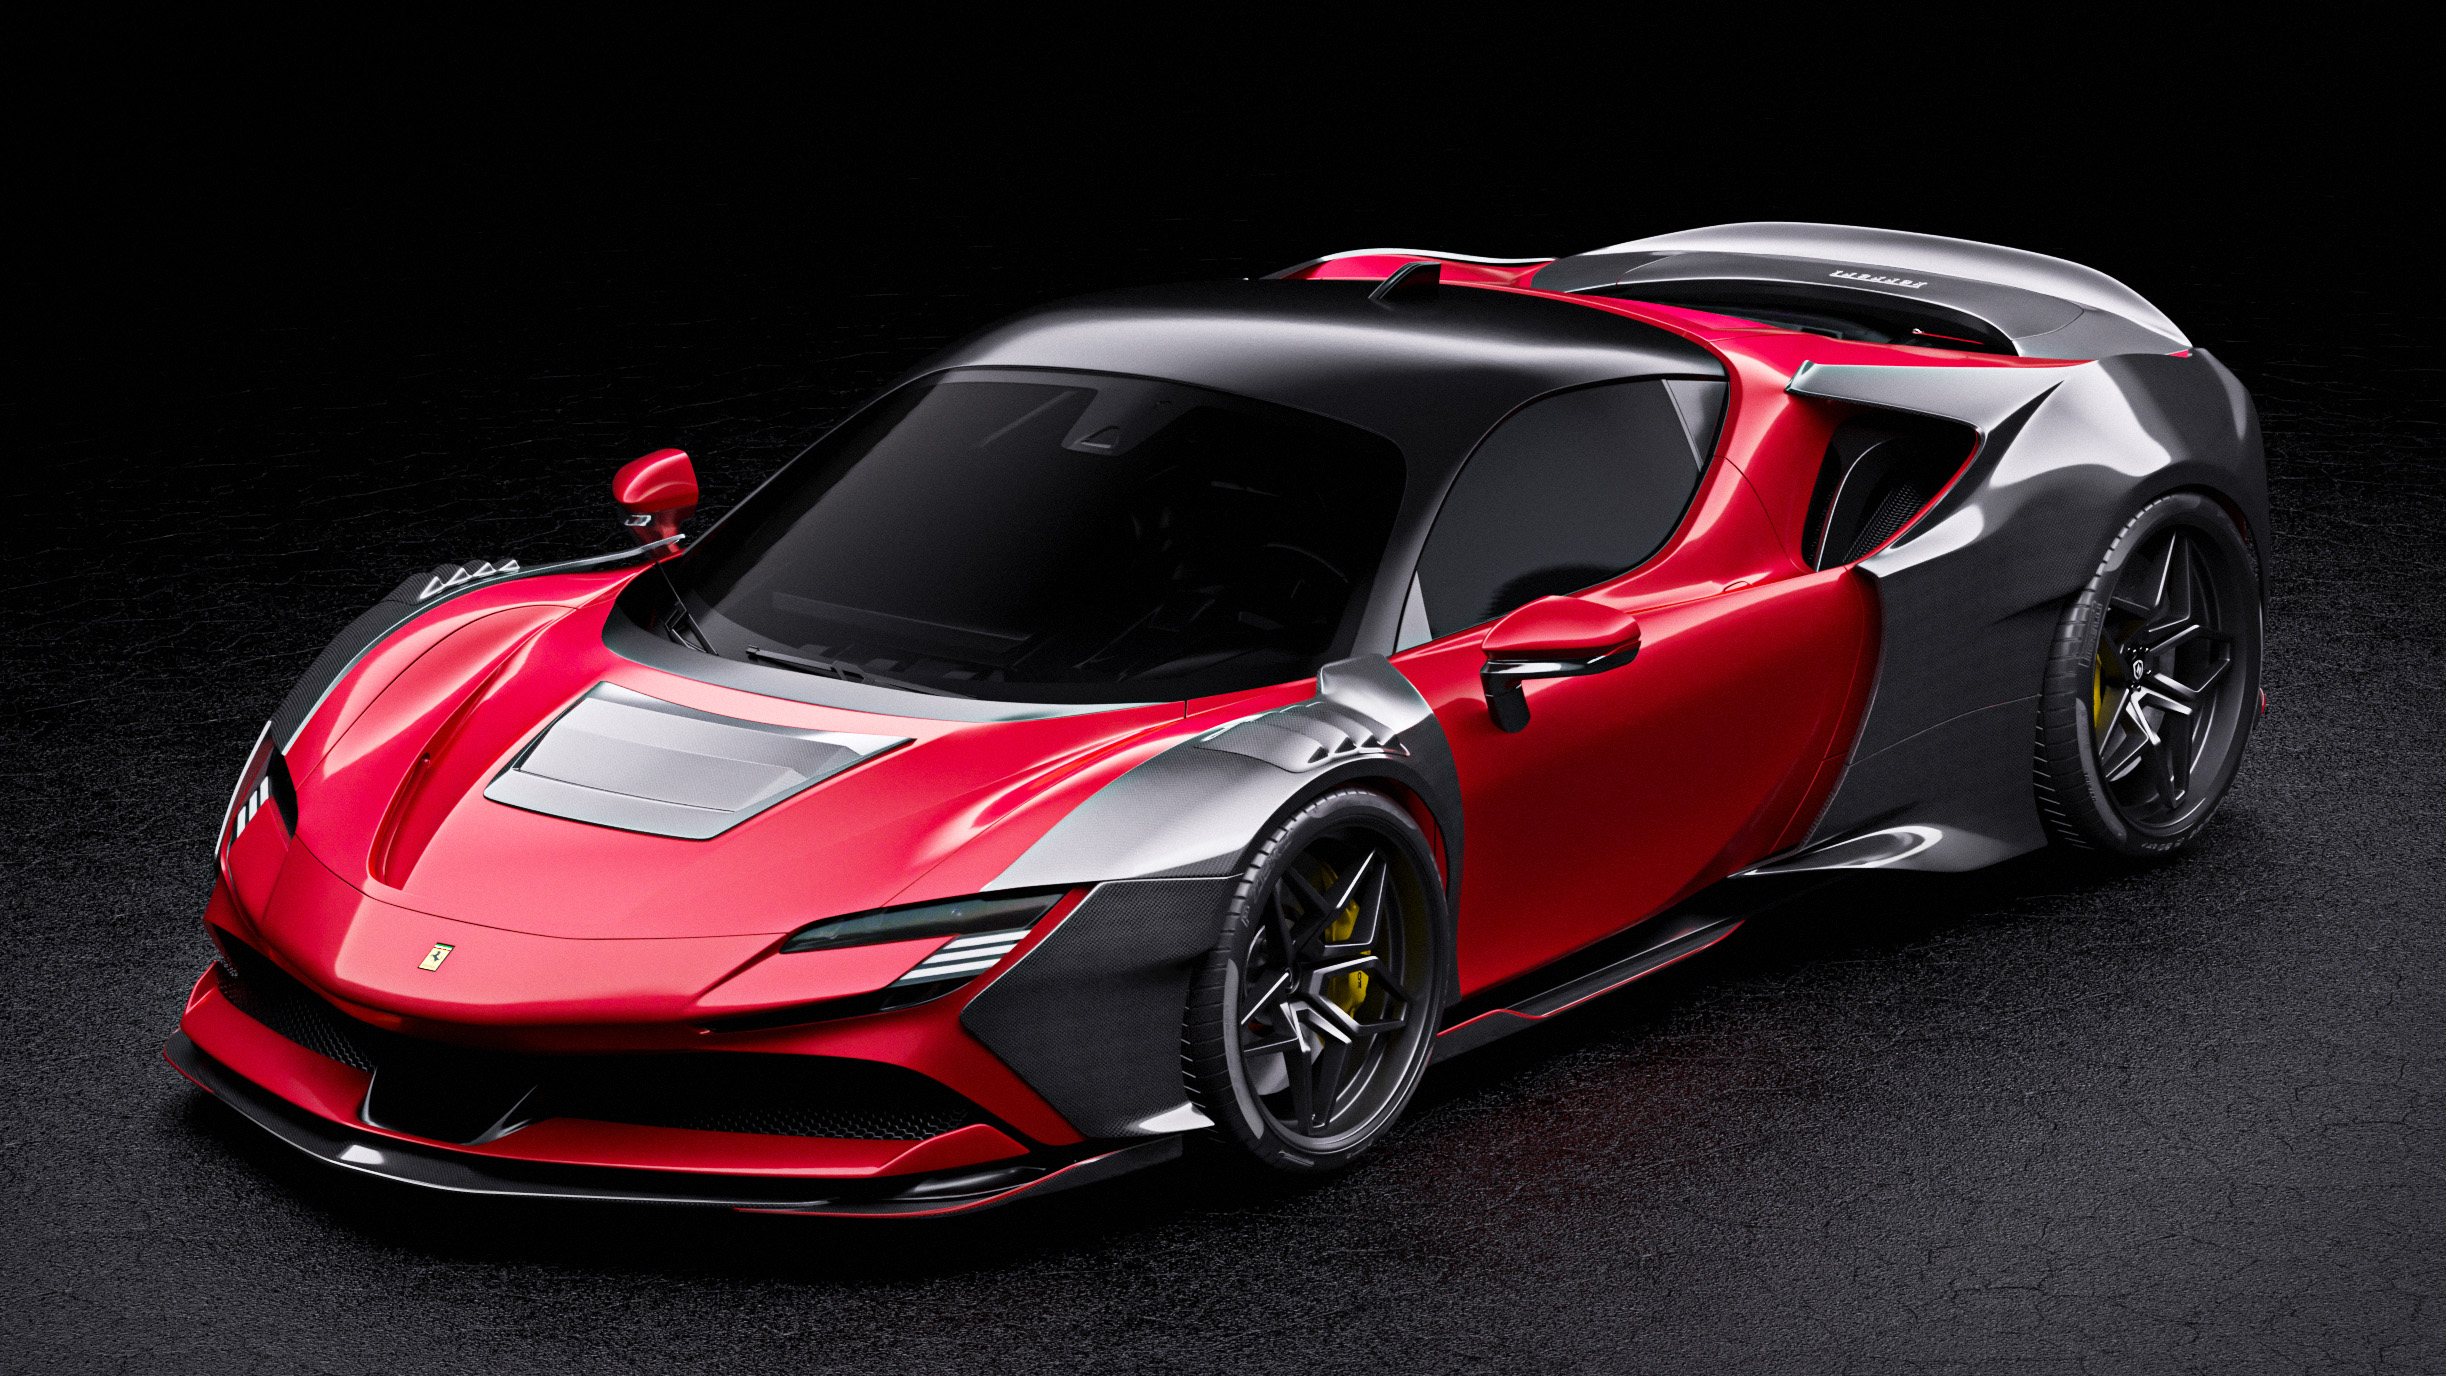 zacoe’s carbon fibre widebody kit for the ferrari sf90 is quite... something